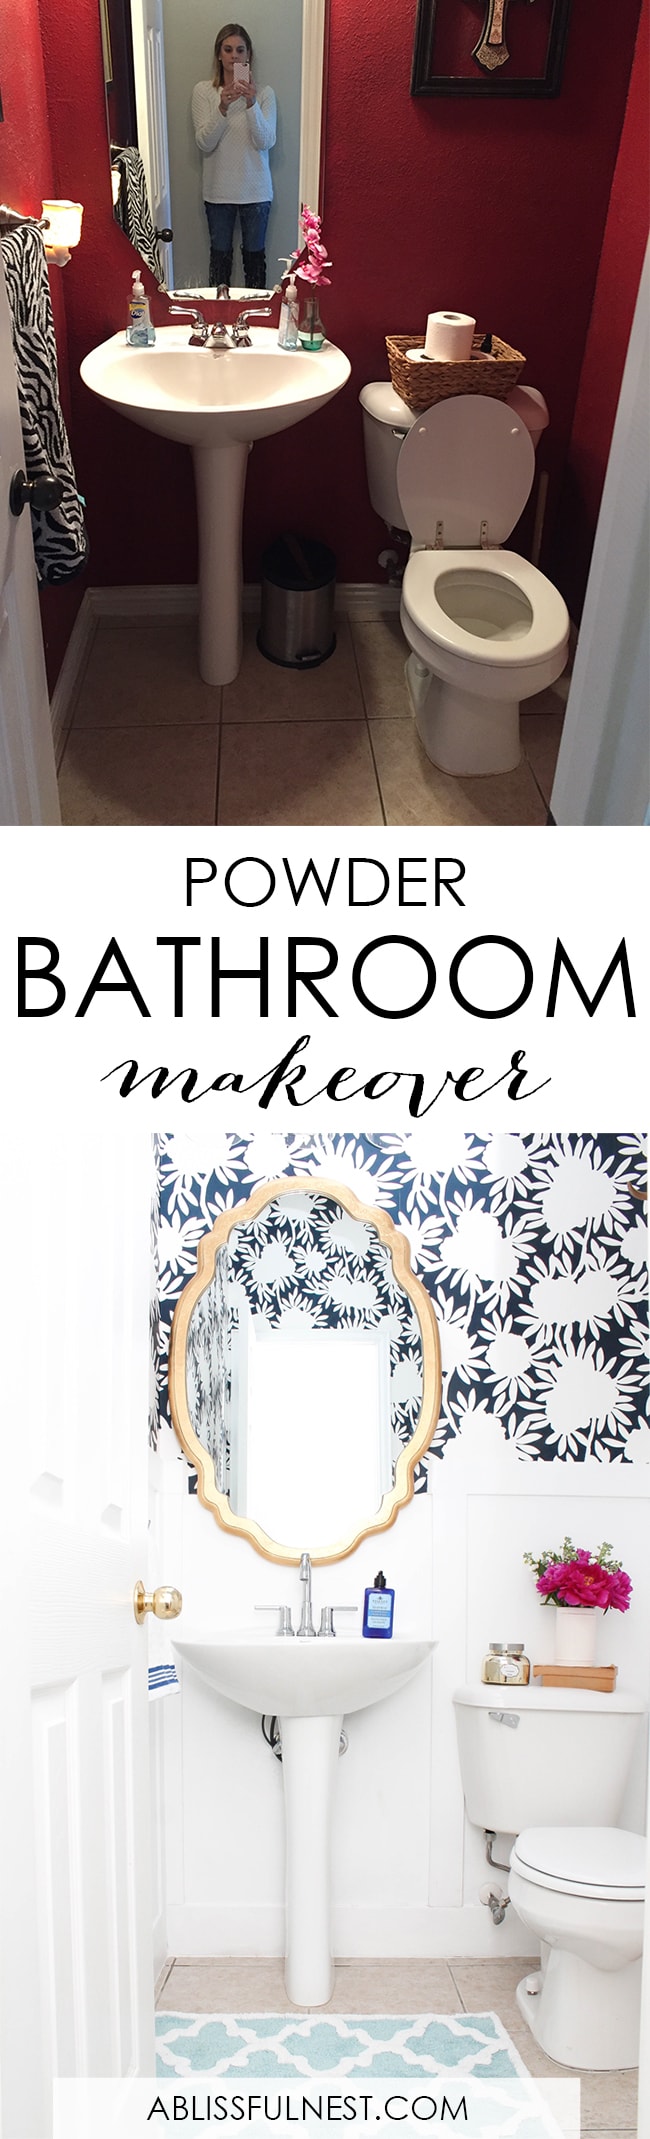 This is such a huge transformation on this bathroom with not many updates. Checkout how with a few simple changes you can get a wow factor bathroom remodel. See more on https://ablissfulnest.com/ #bathroomremodel #bathroommakeover #ad #deltafaucet #deltaliving